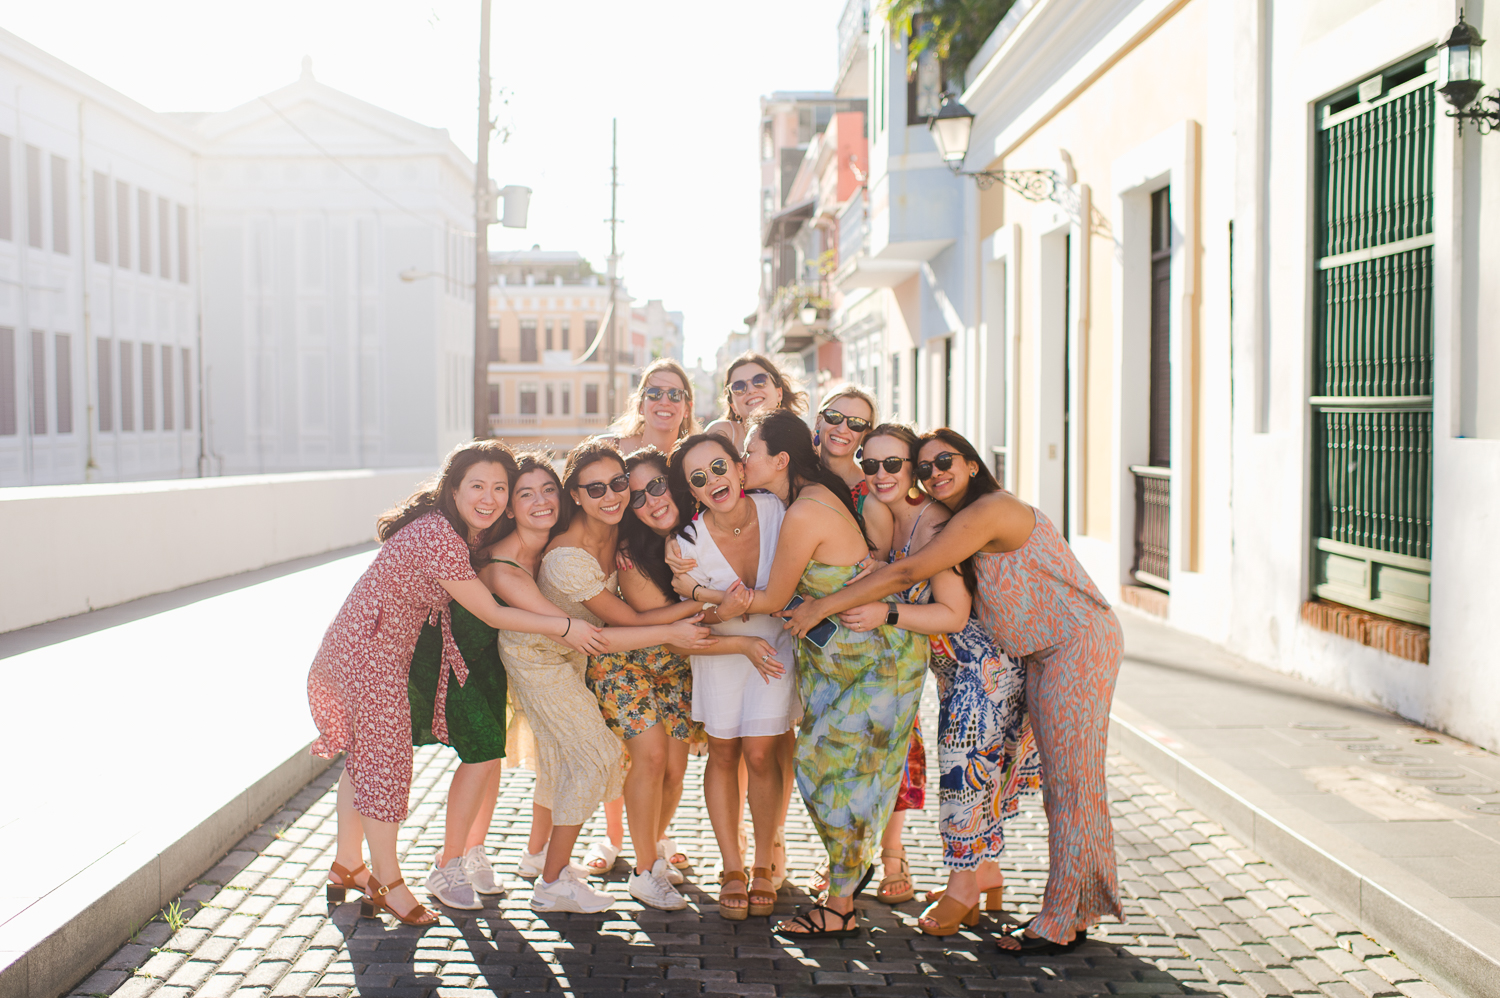 Starry & her friends had an unforgettable bachelorette trip to Puerto Rico, topped off with stunning bachelorette party photos in Old San Juan during SanSe!